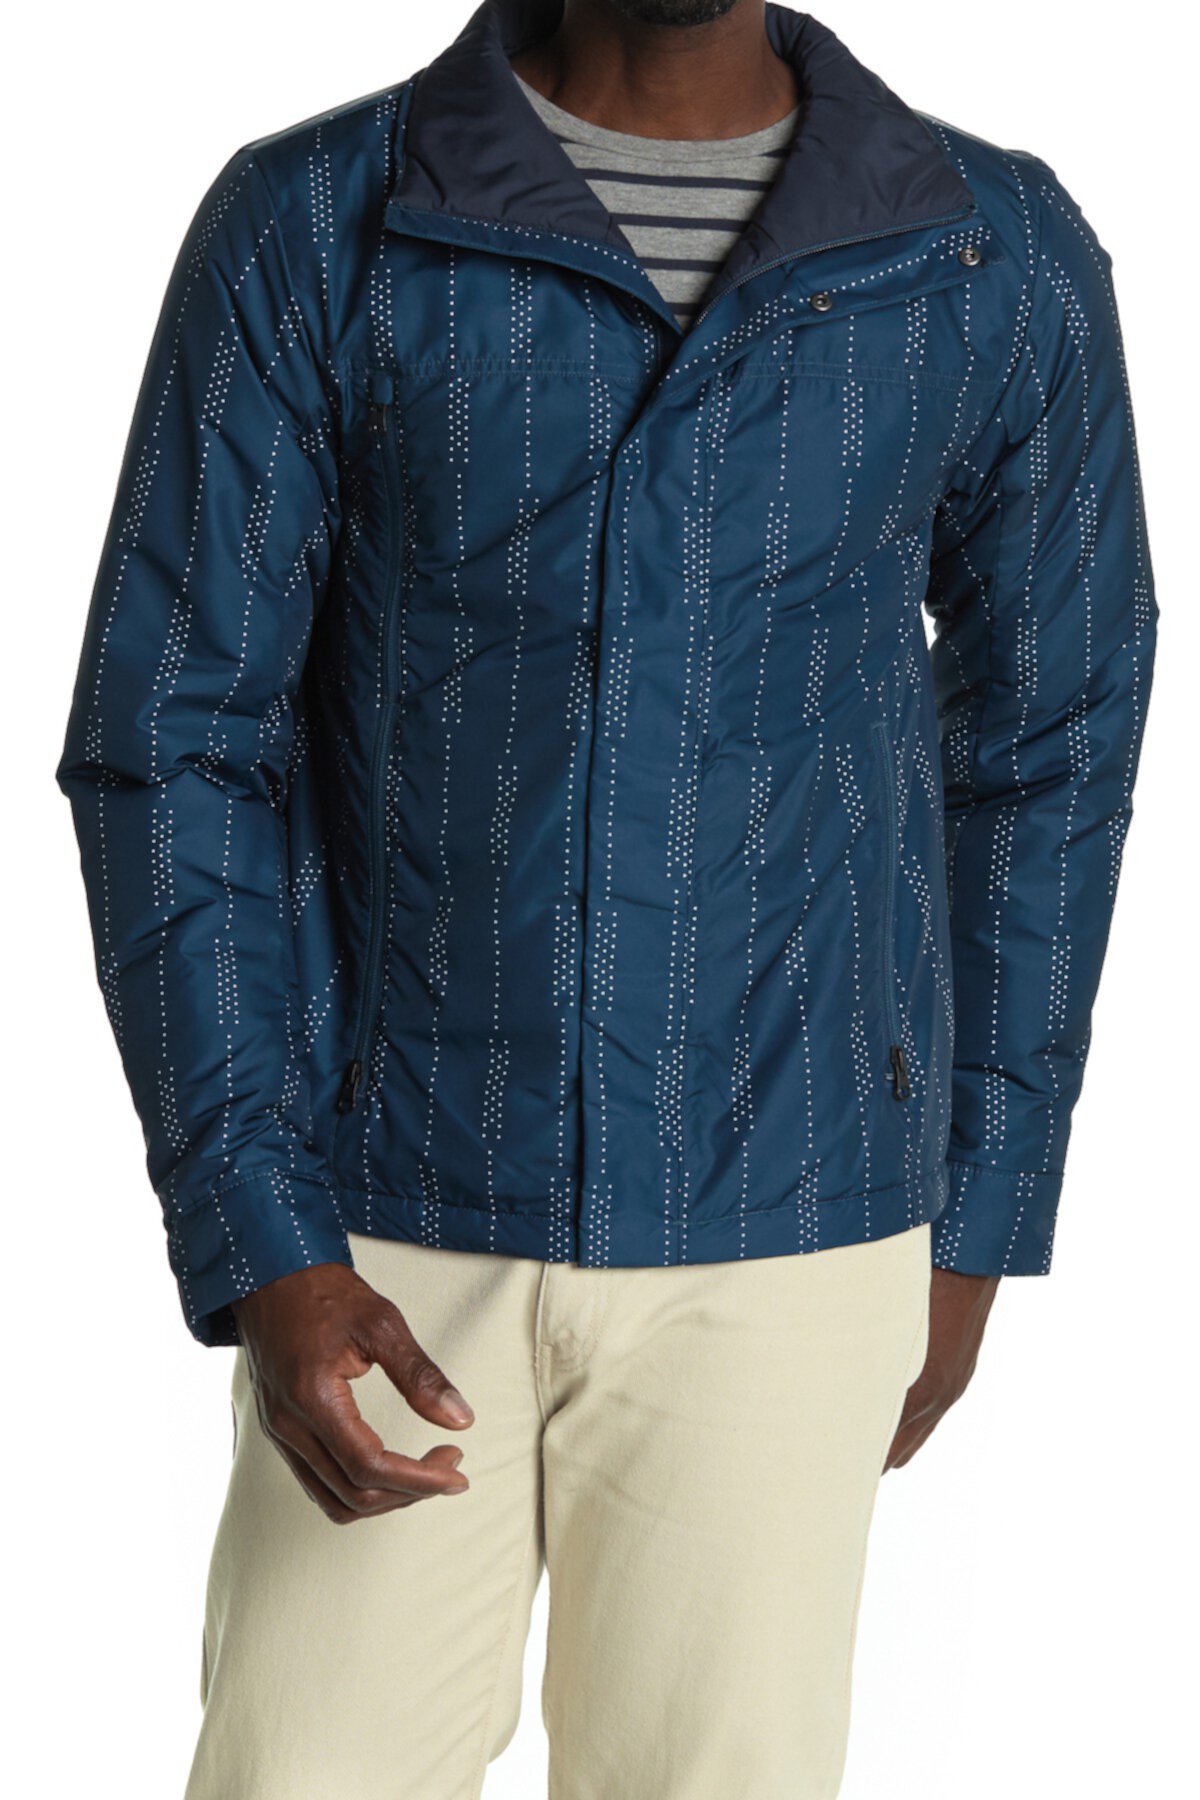 Everit Patterned Jacket The North Face